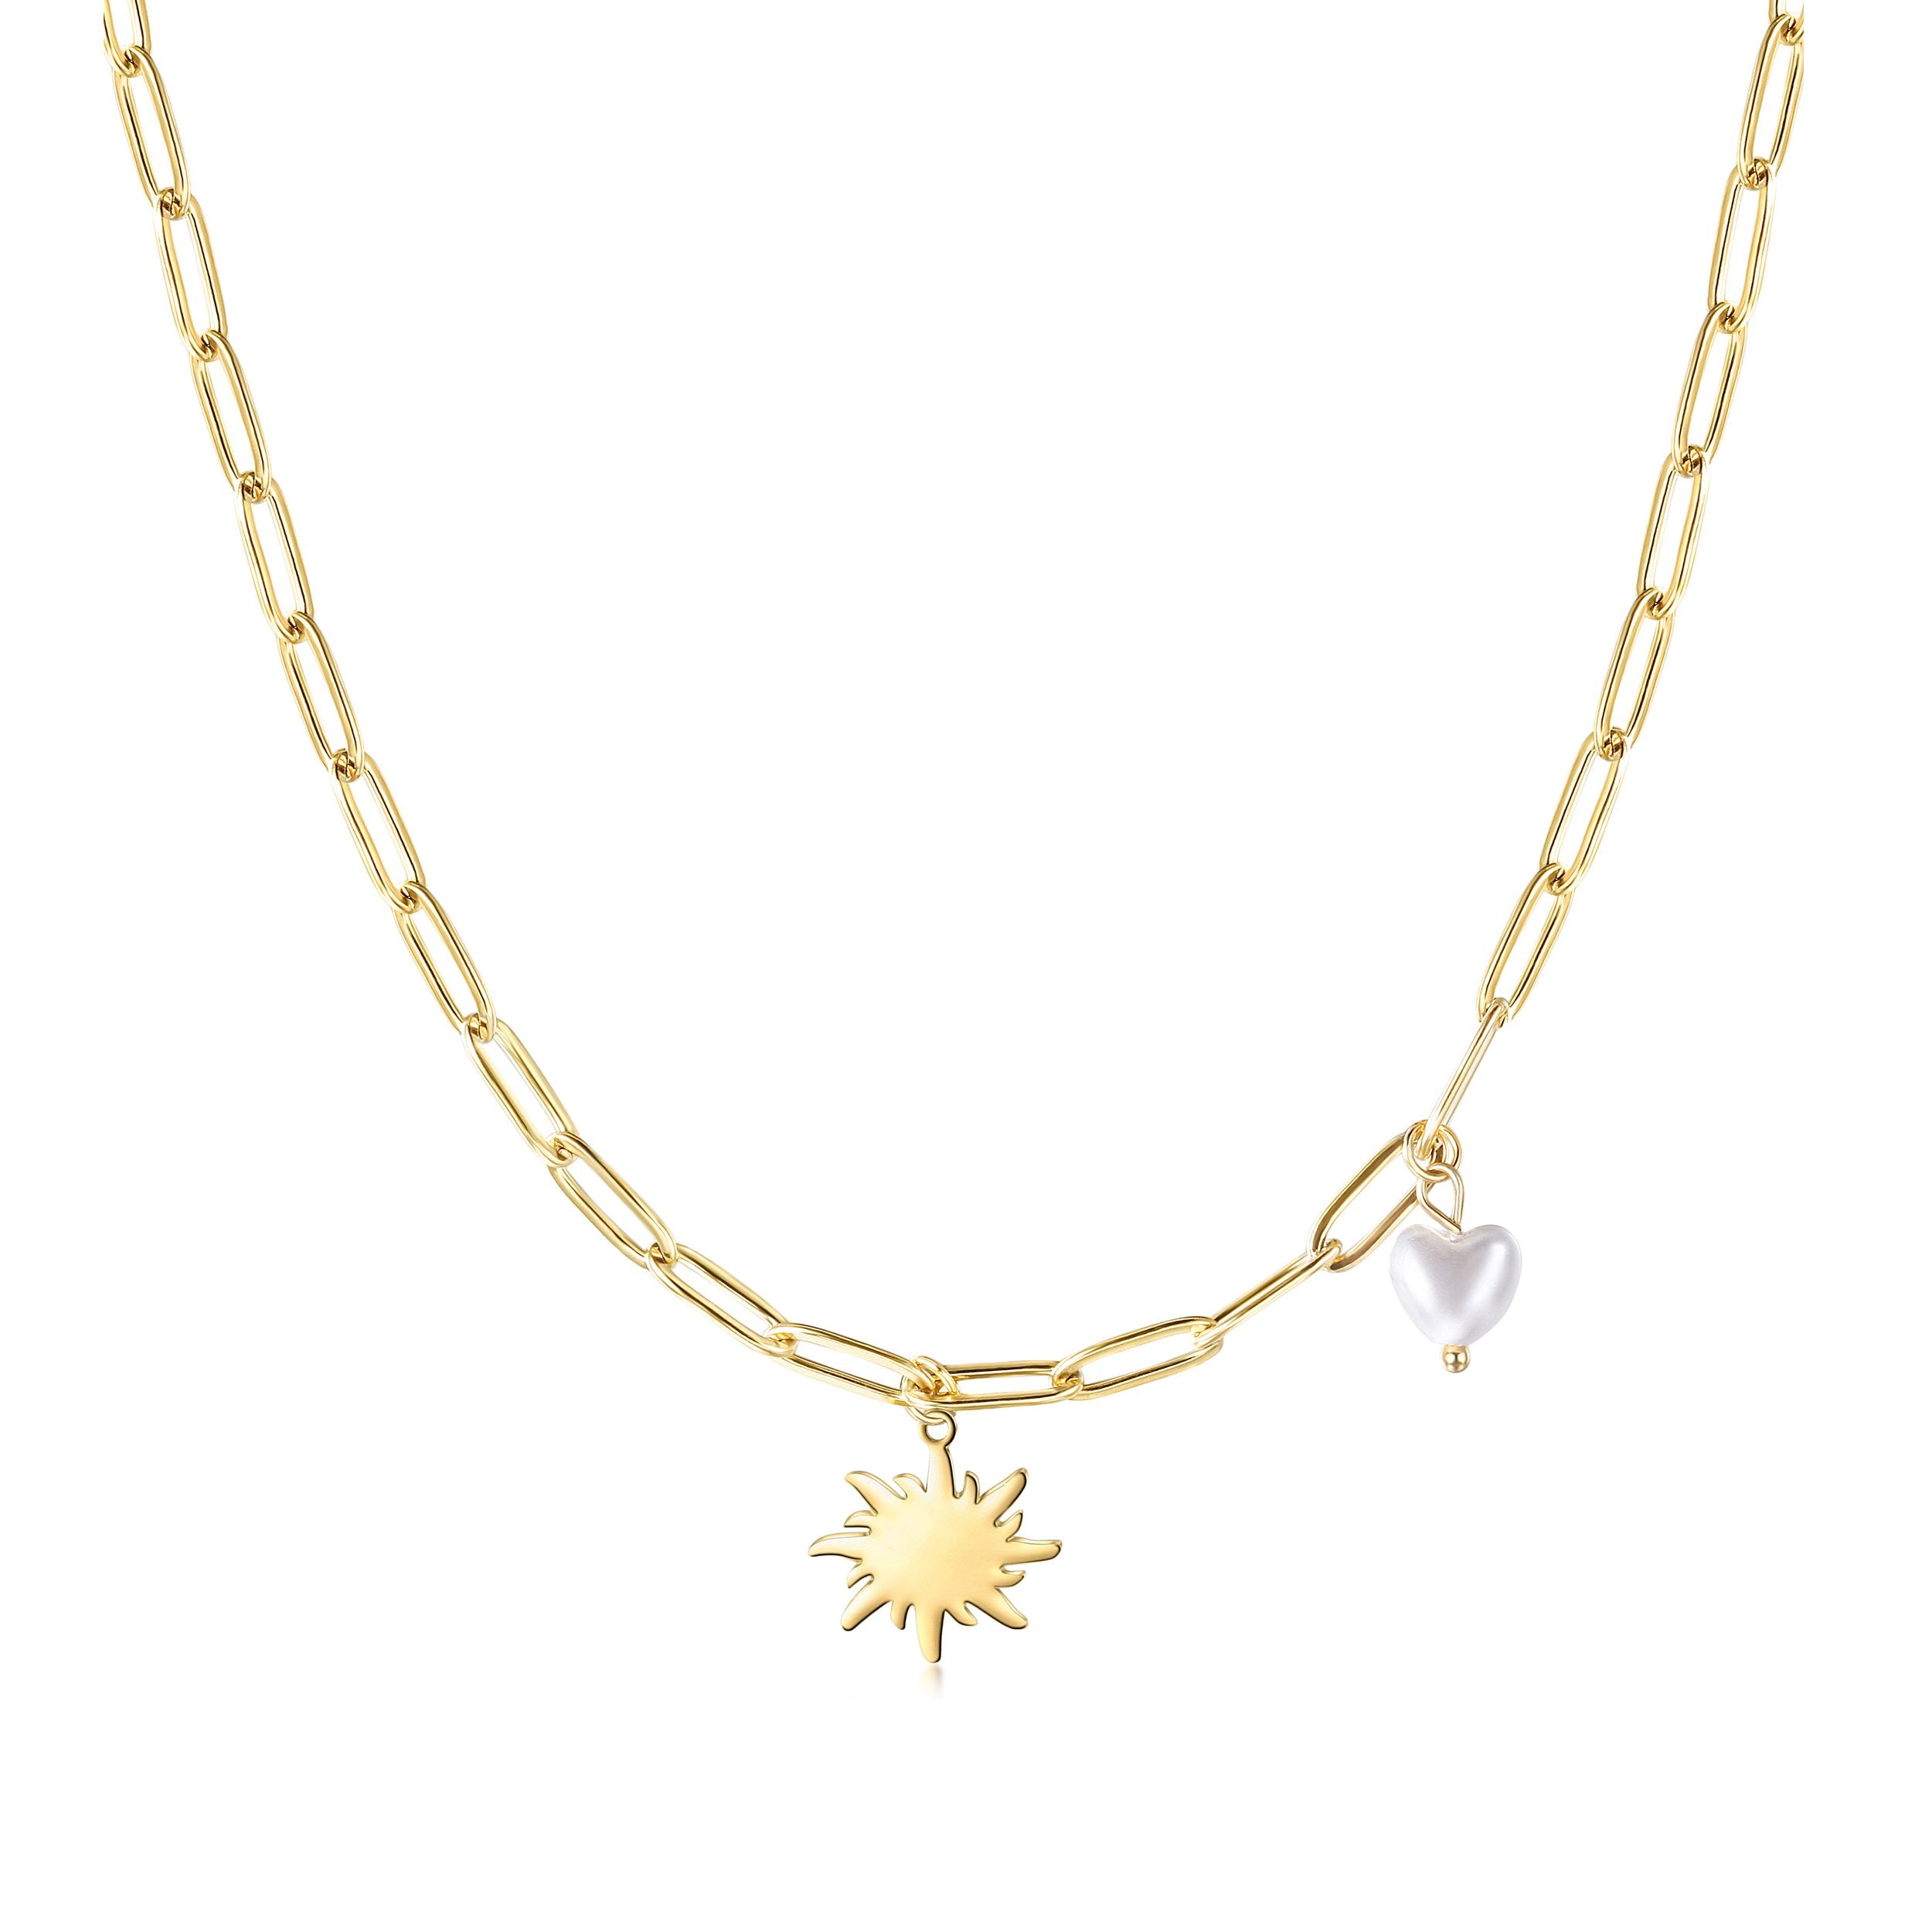 Gold Sun Pendant Necklace with Heart-shaped Pearl - Hypoallergenic & Non-tarnishing - Jewelry & Watches - Bijou Her -  -  - 